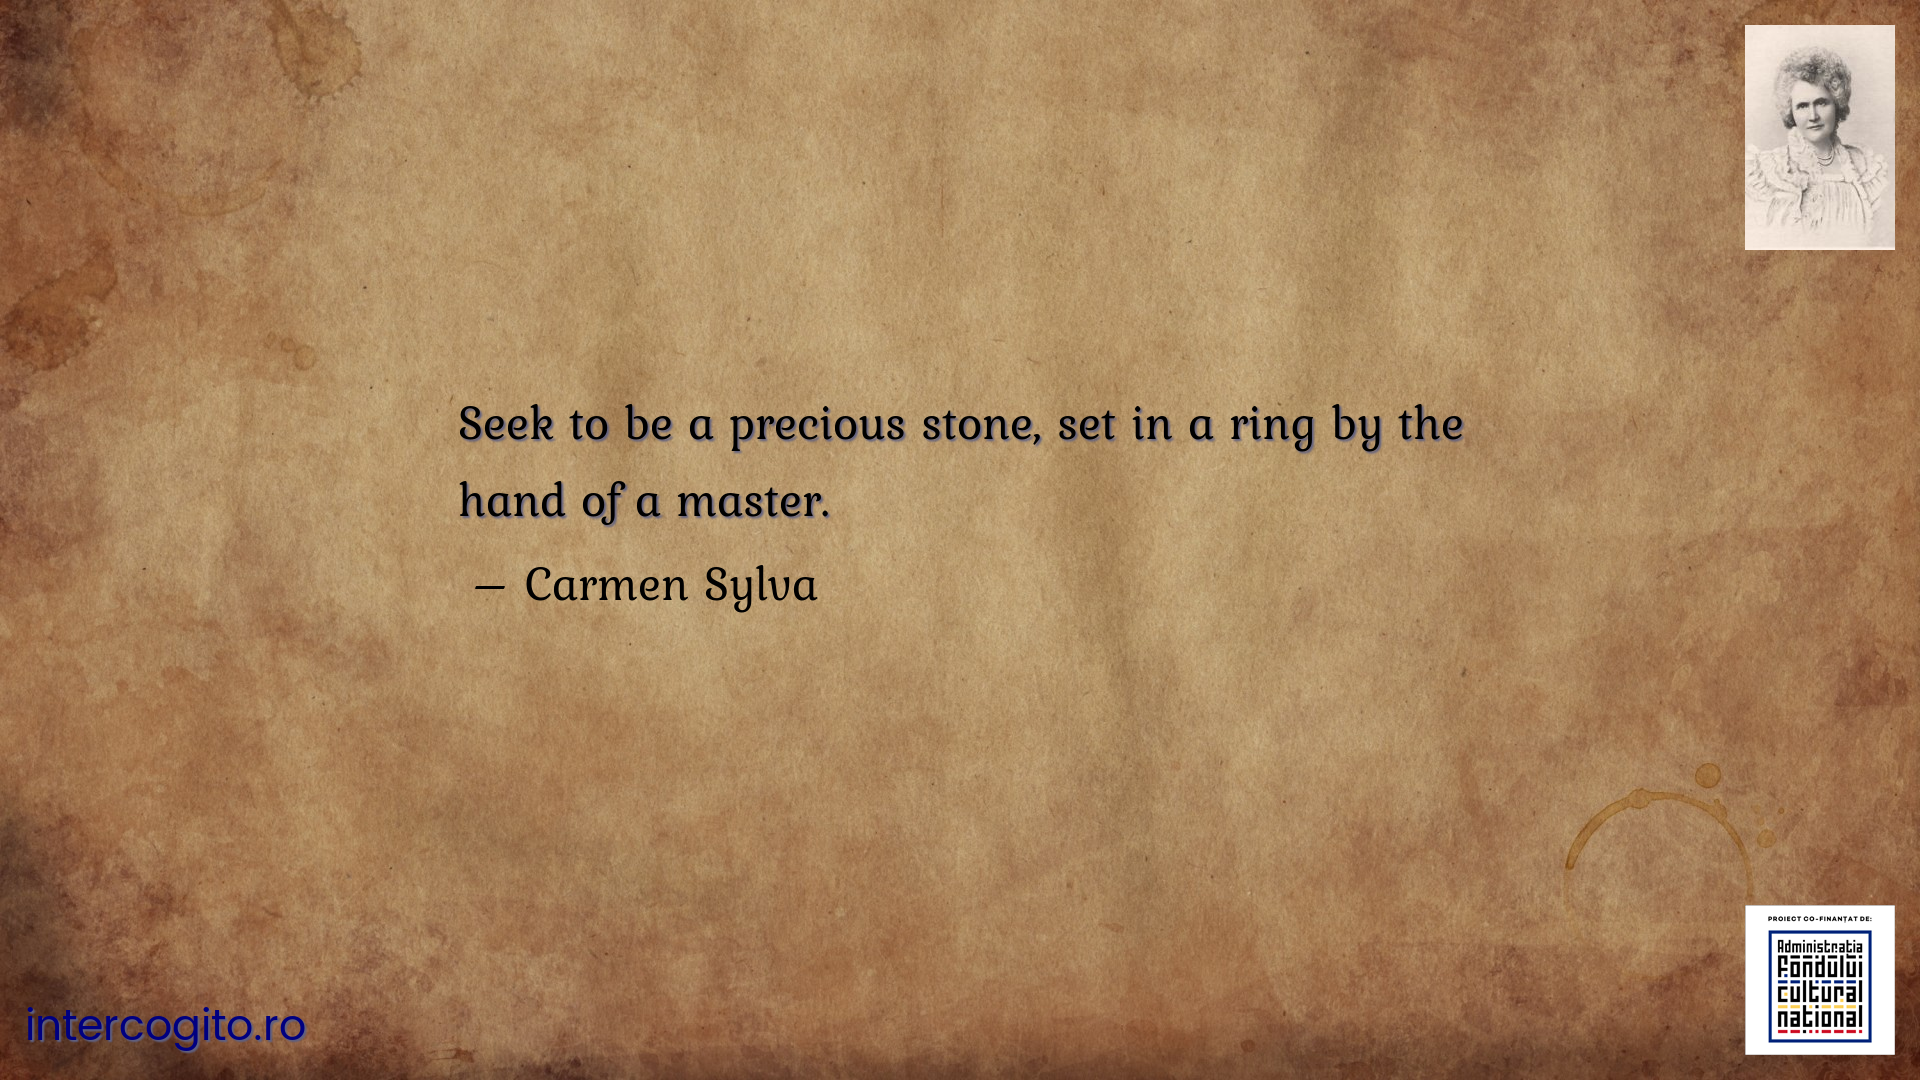 Seek to be a precious stone, set in a ring by the hand of a master.